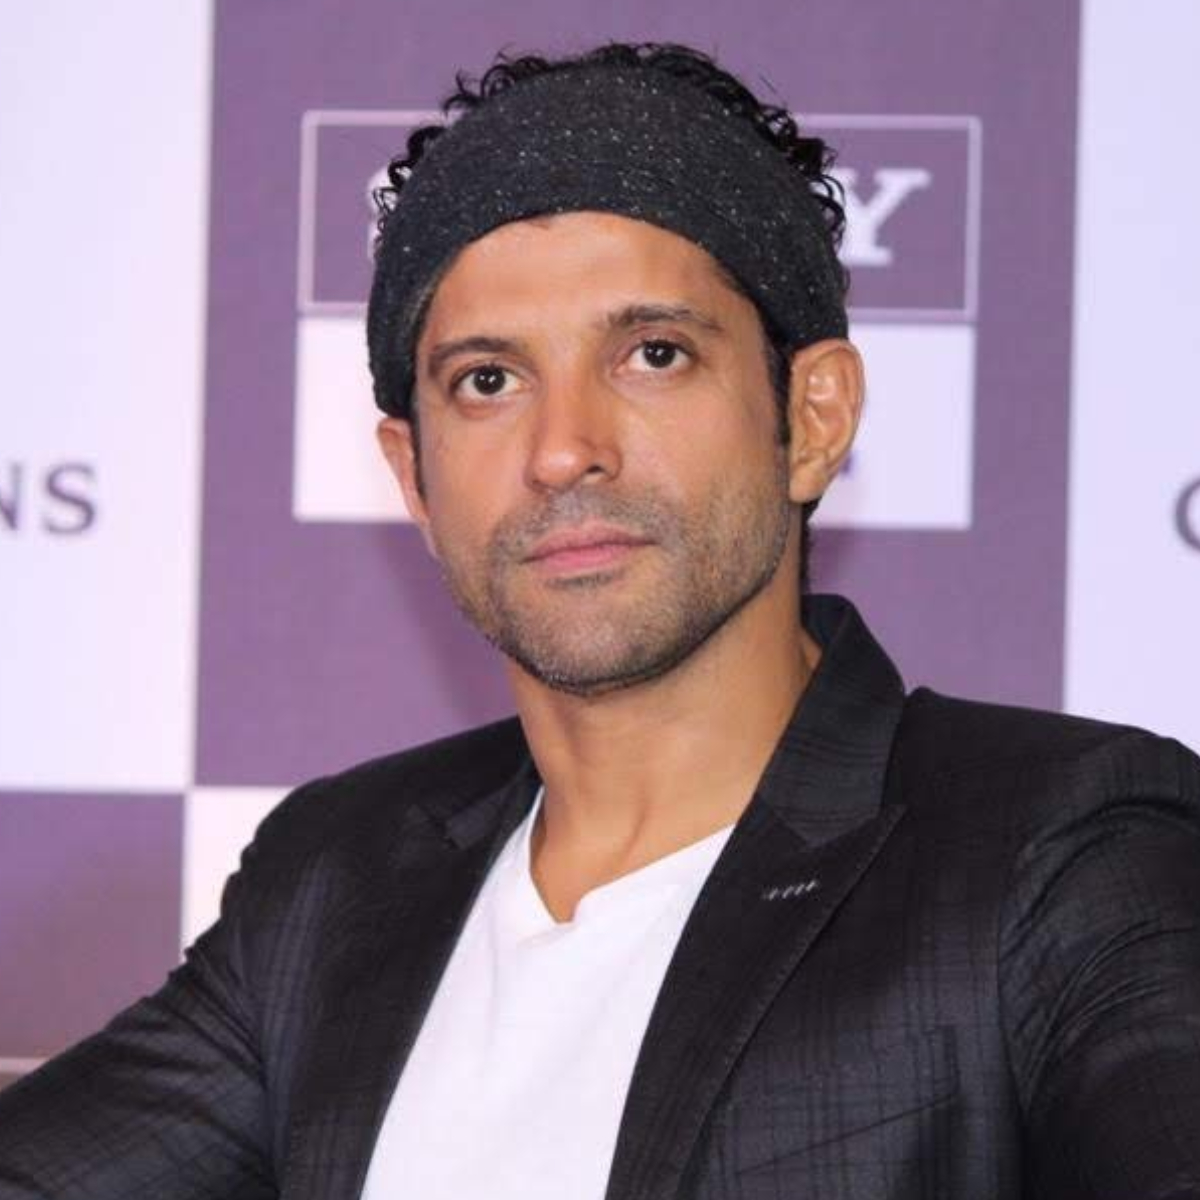 EXCLUSIVE: Farhan Akhtar reveals he intends to direct again; Is constantly asked about Dil Chahta Hai 2, Don 3